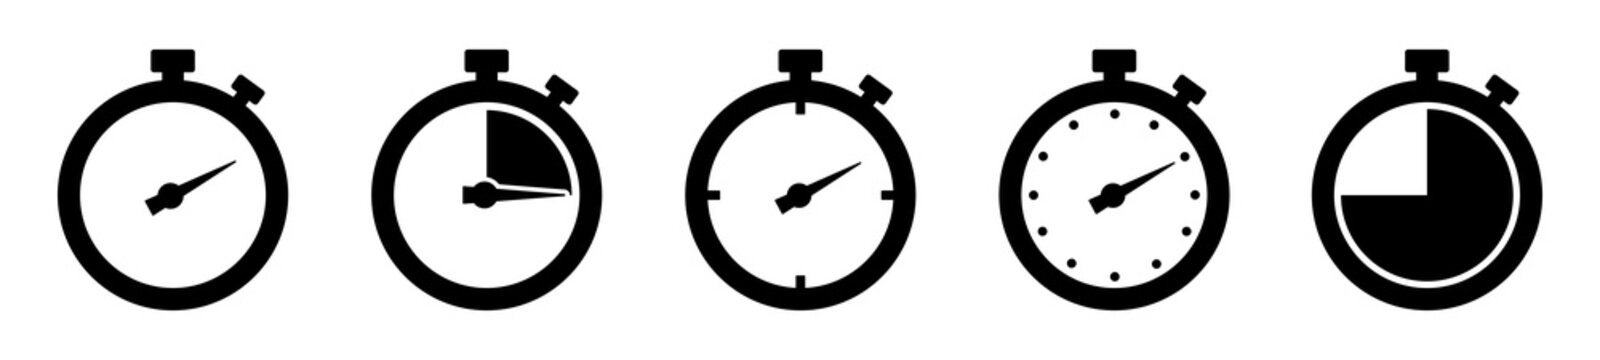 Timers Icon Set On Transparent Background